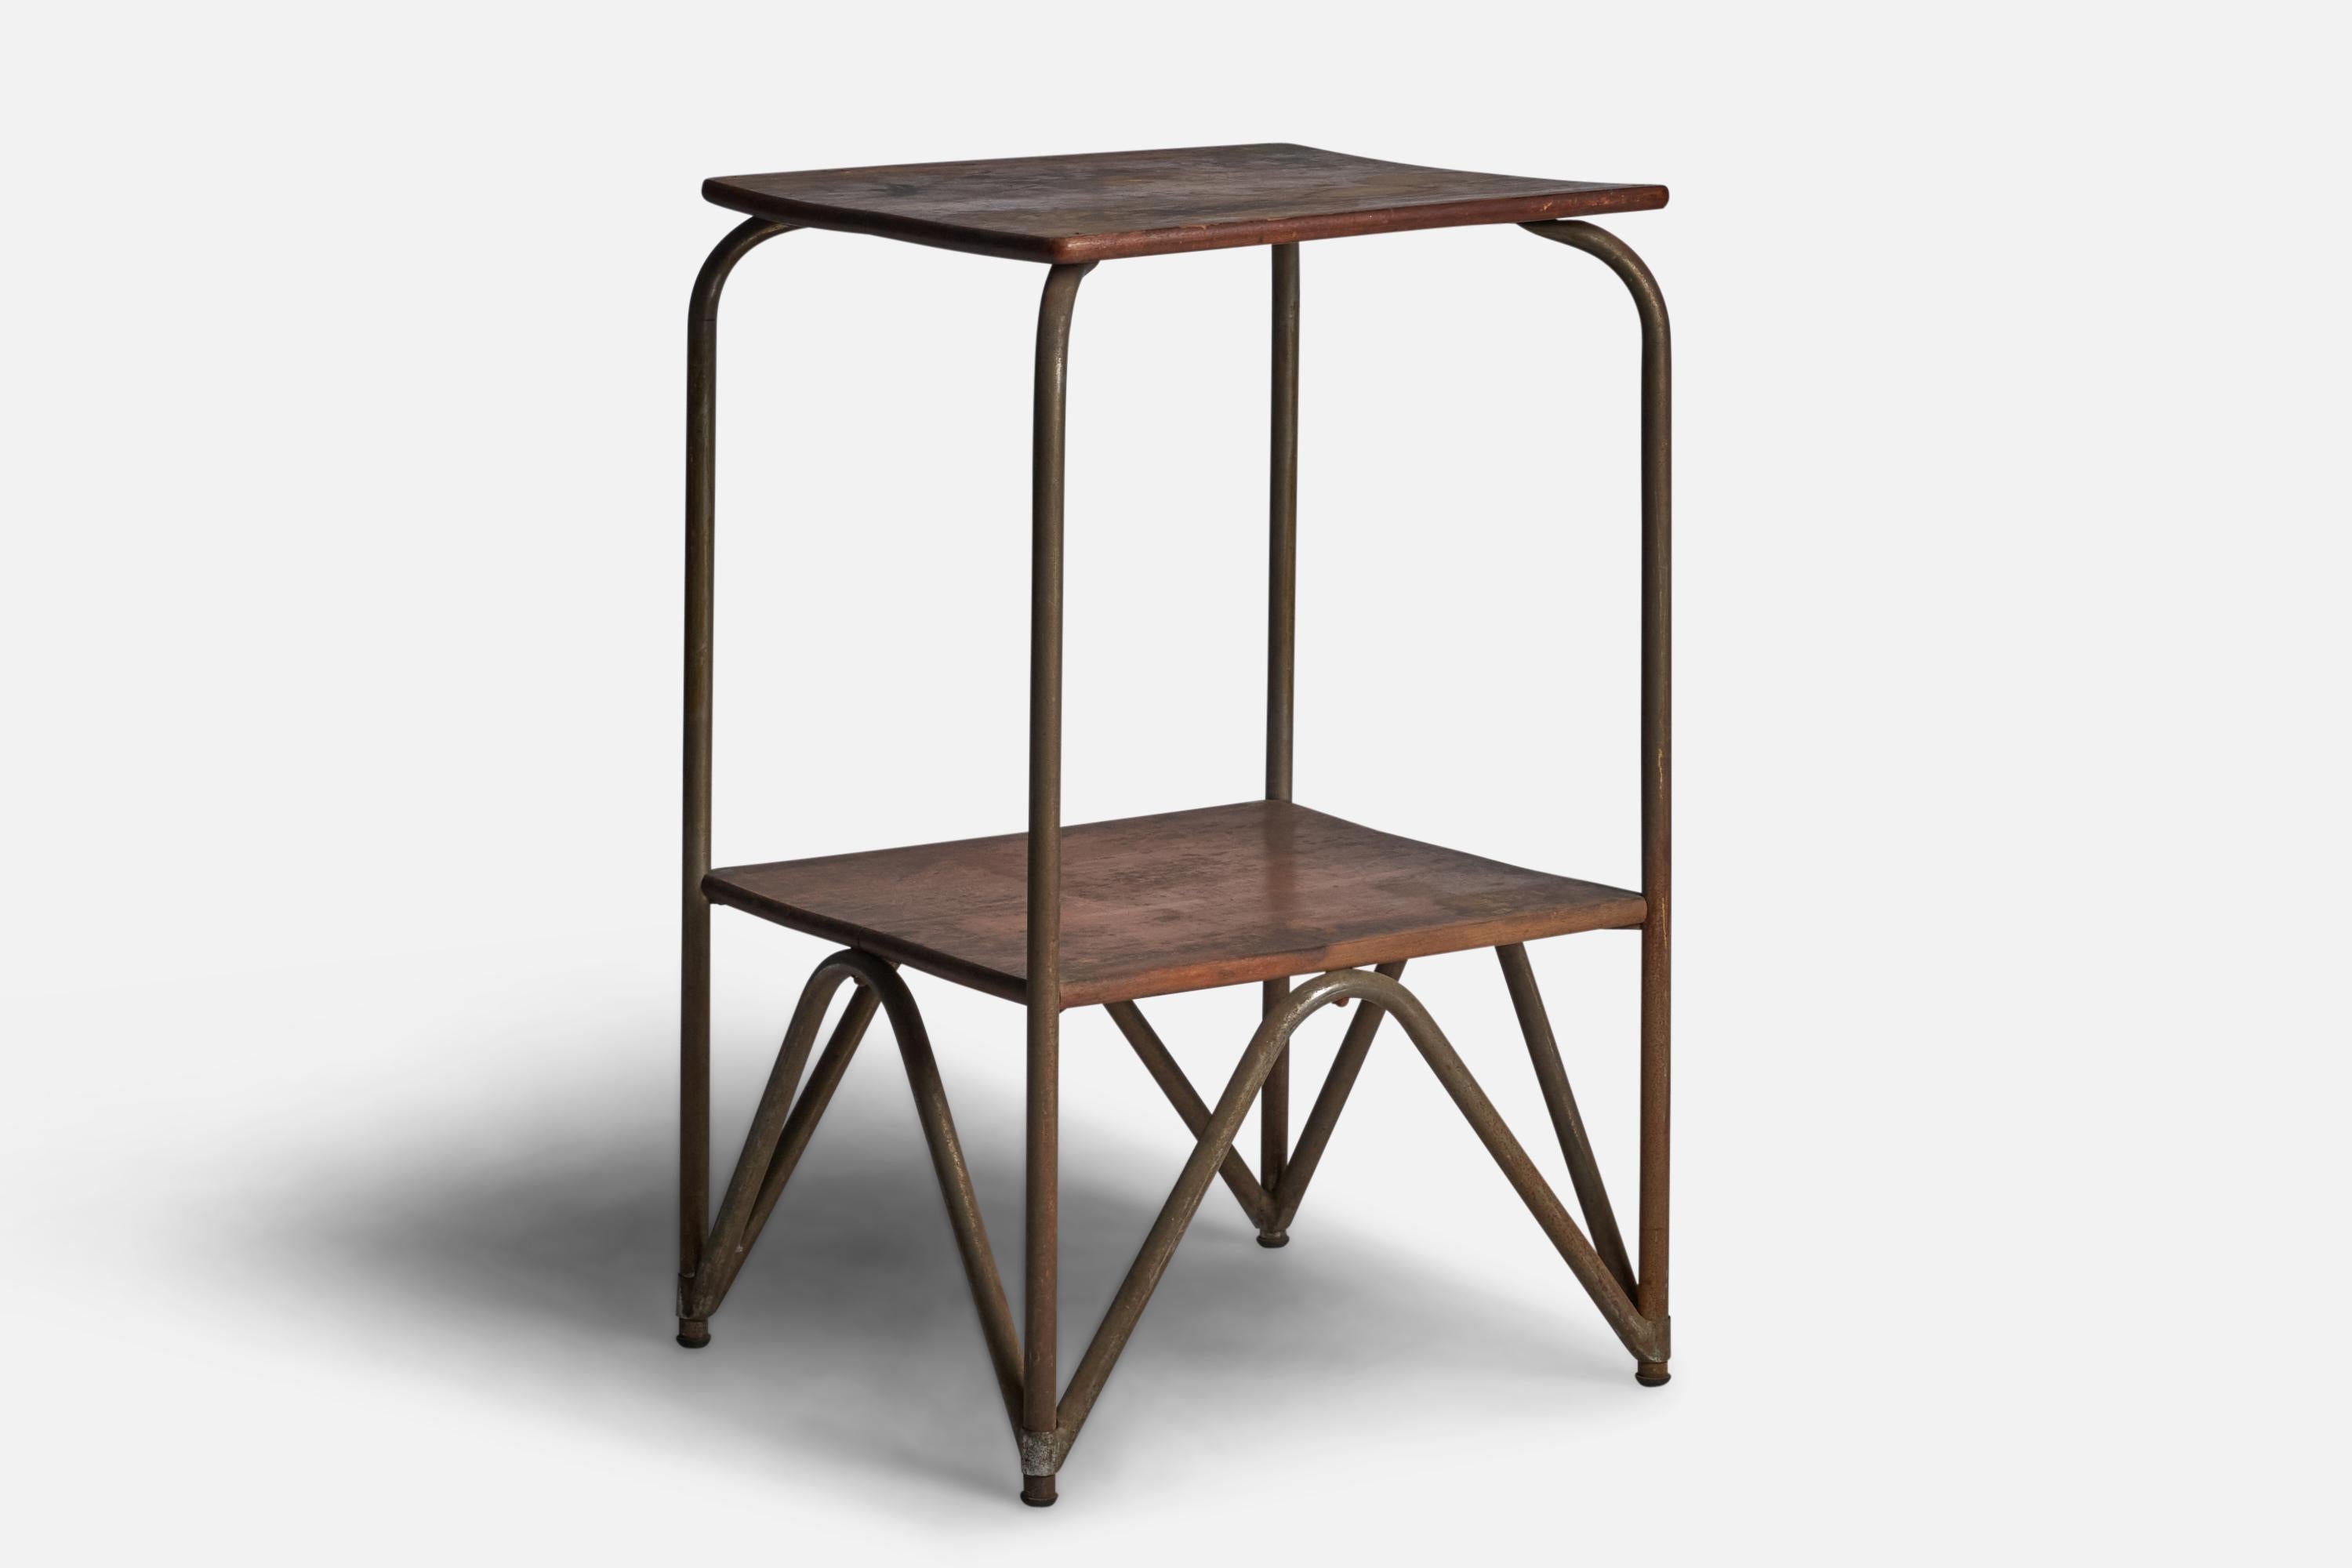 A two-tiered metal and wood side table designed and produced in Italy, 1930s.